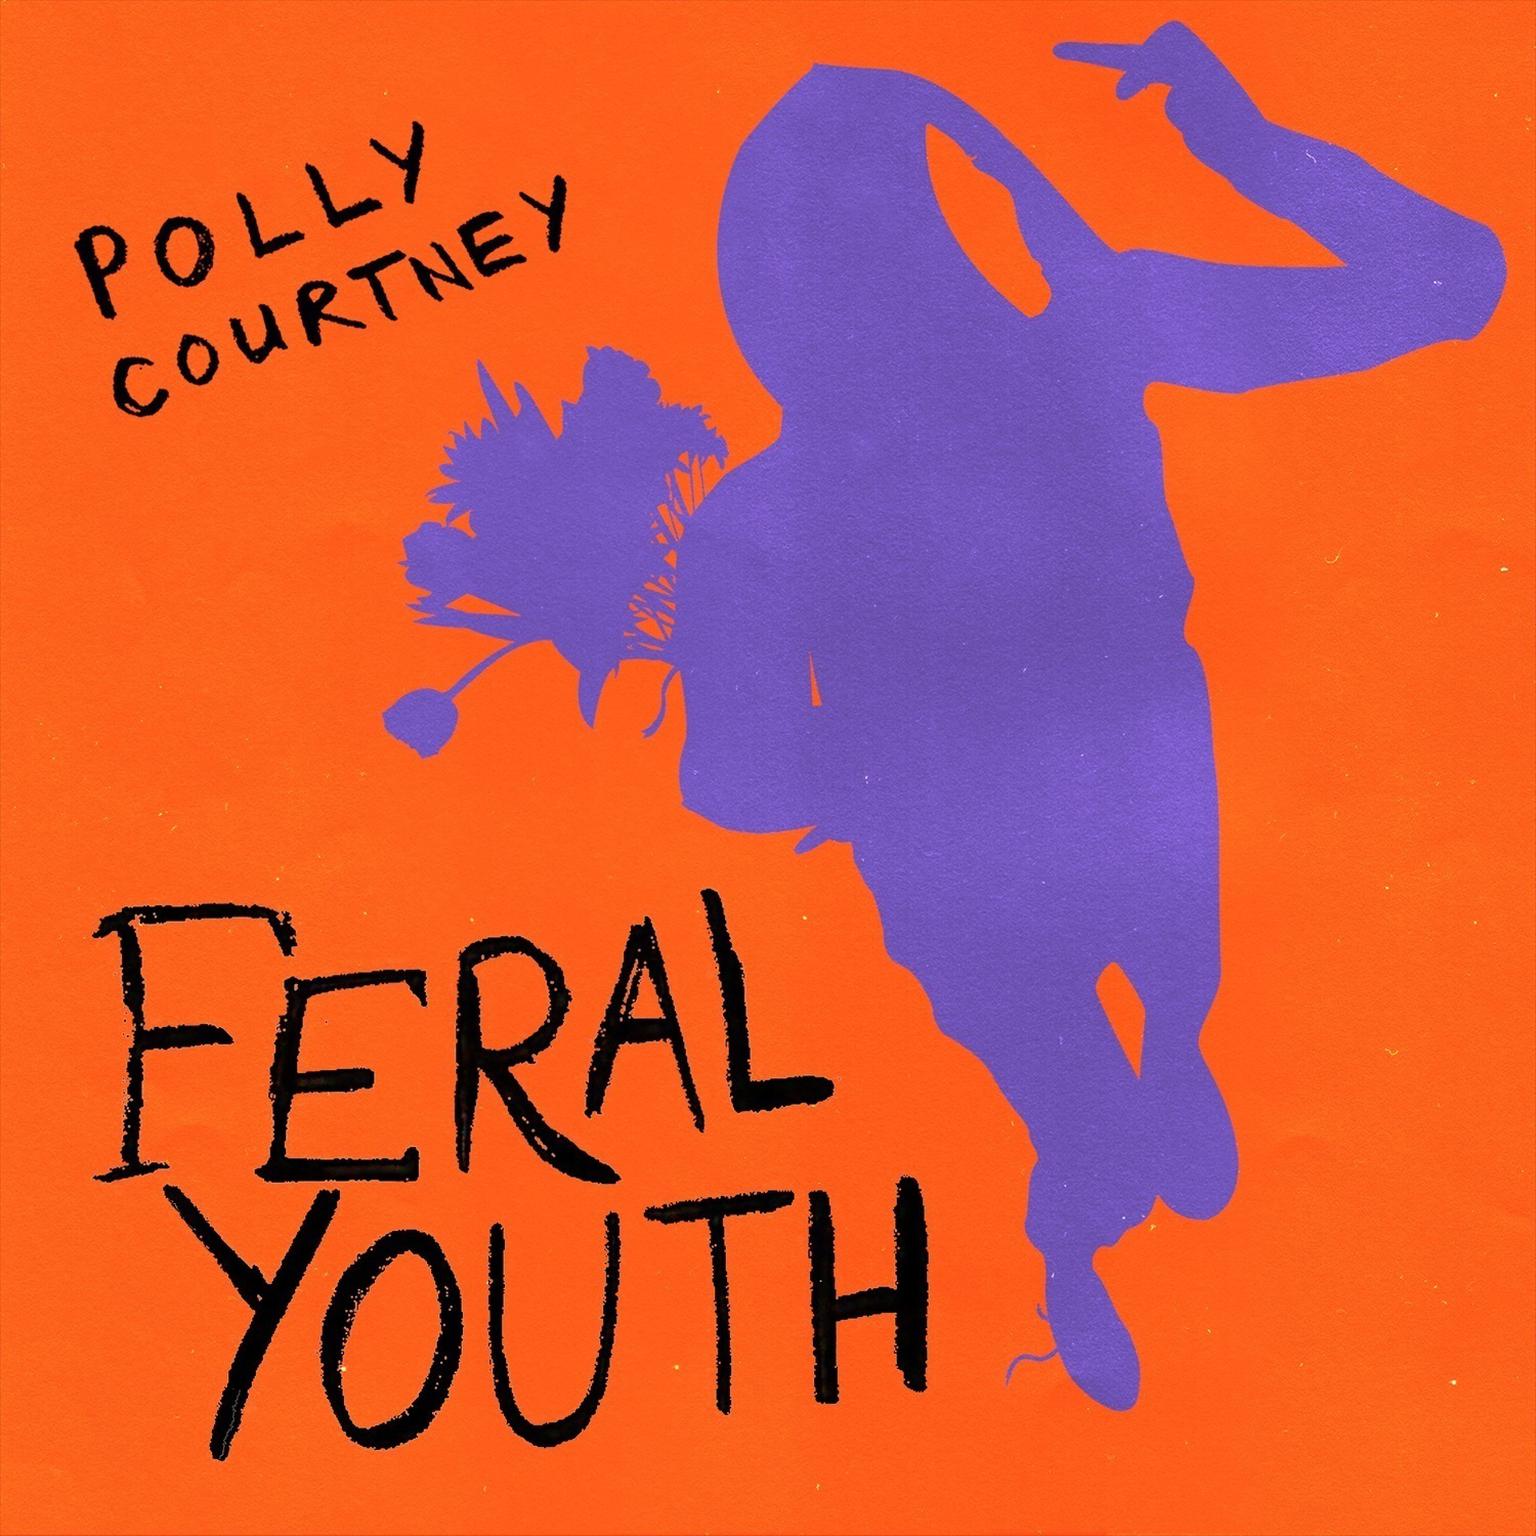 Feral Youth Audiobook, by Polly Courtney